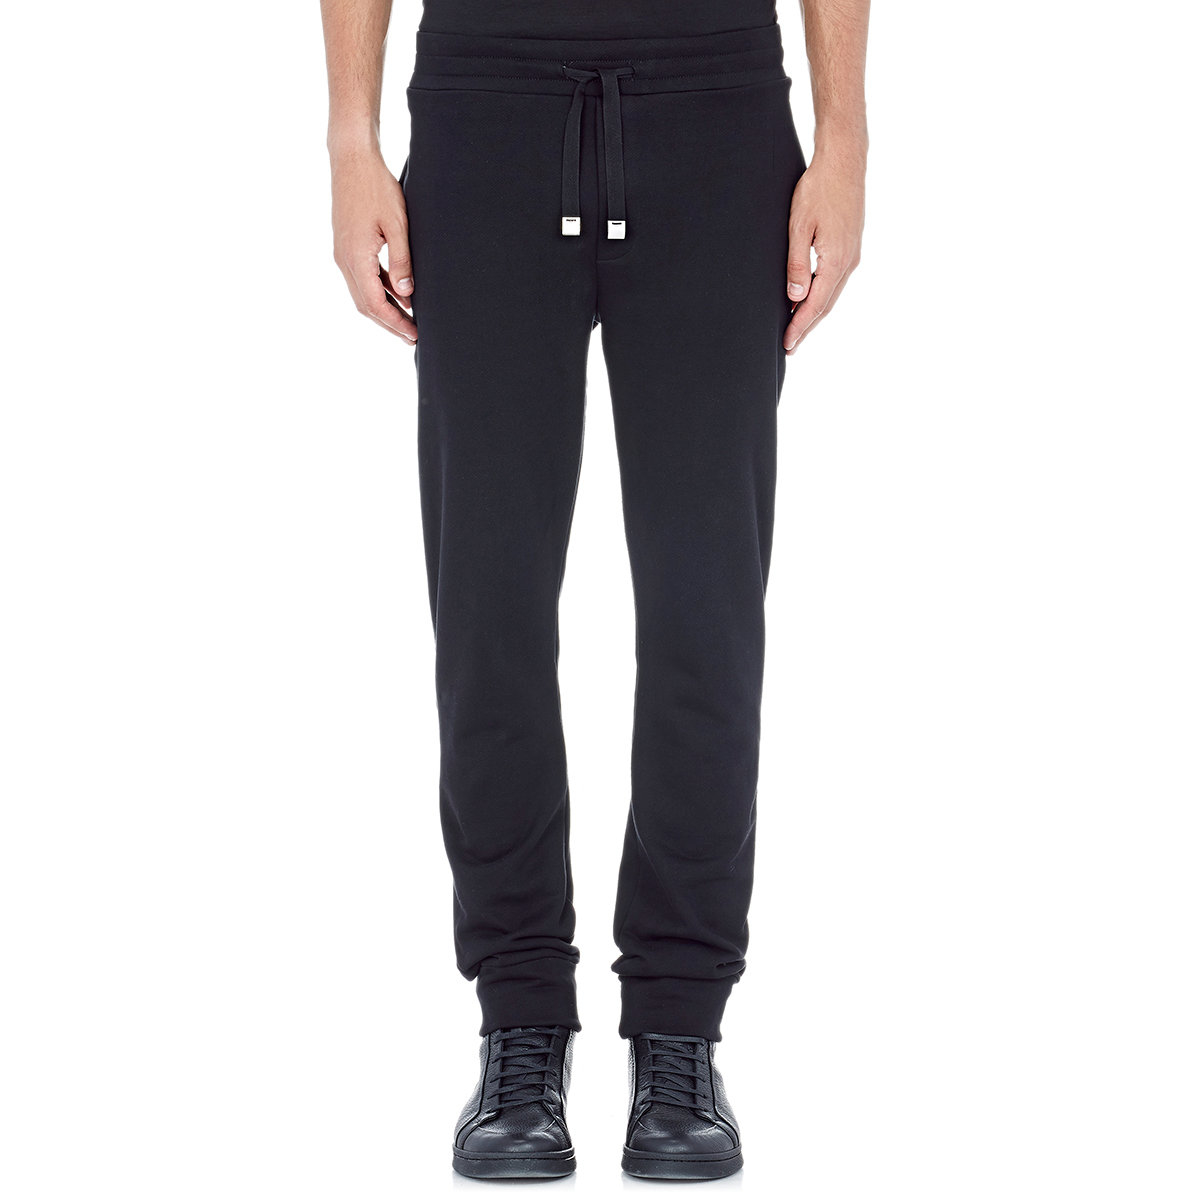 Lyst - Balenciaga Men's Logo-embossed French Terry Sweatpants in Black ...